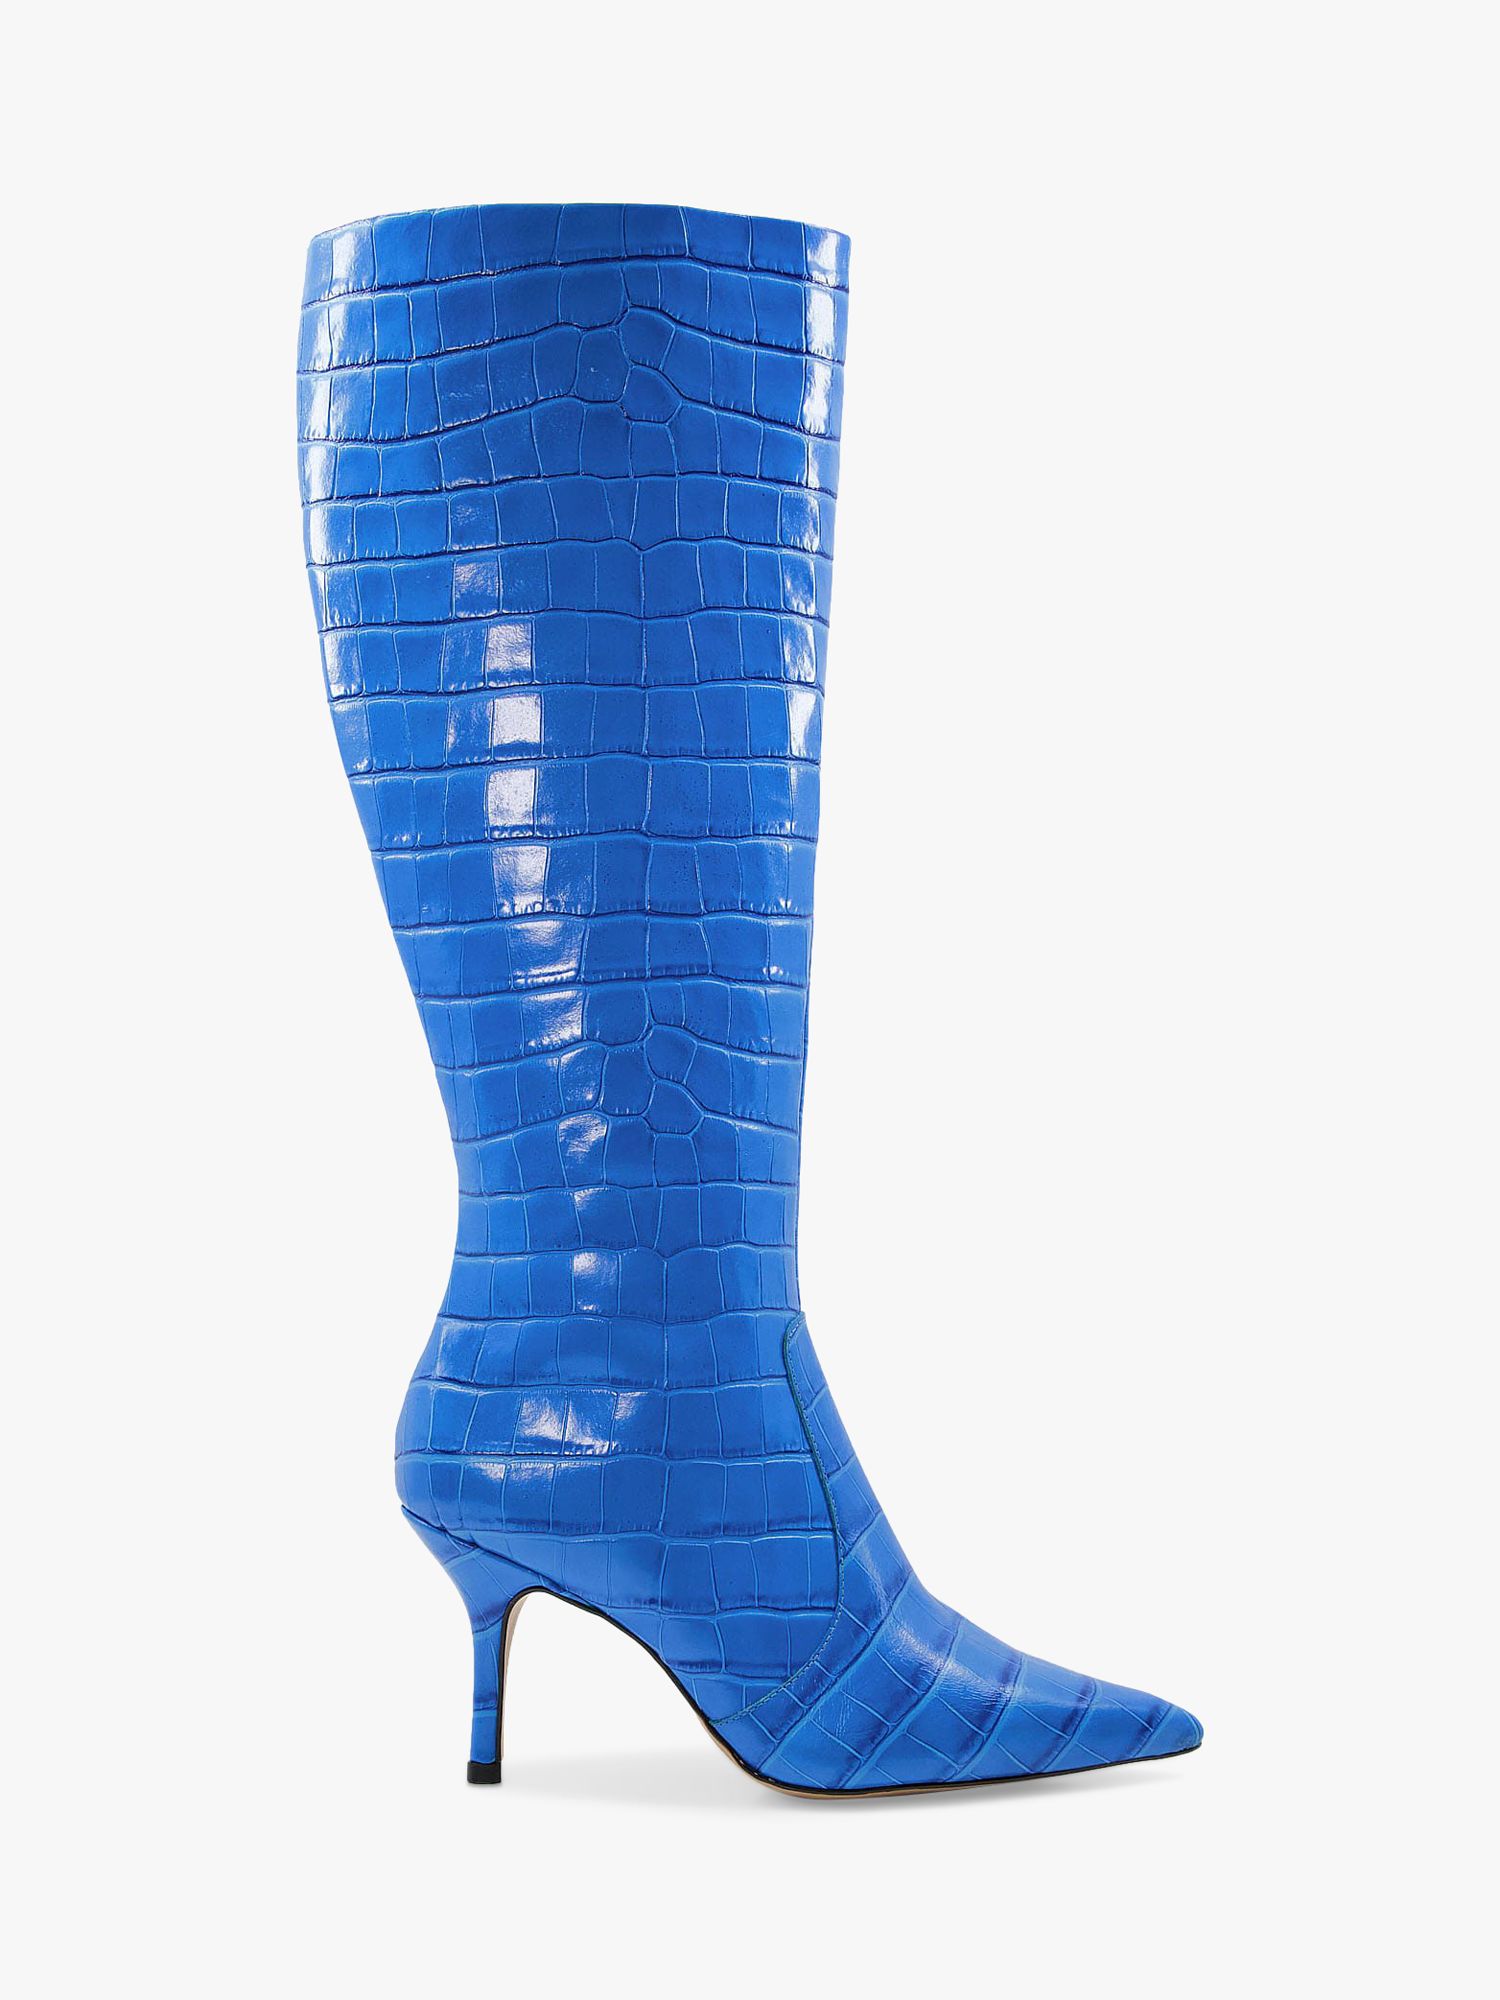 Dune Spritz Leather Croc Effect Knee High Boots, Blue at John Lewis ...